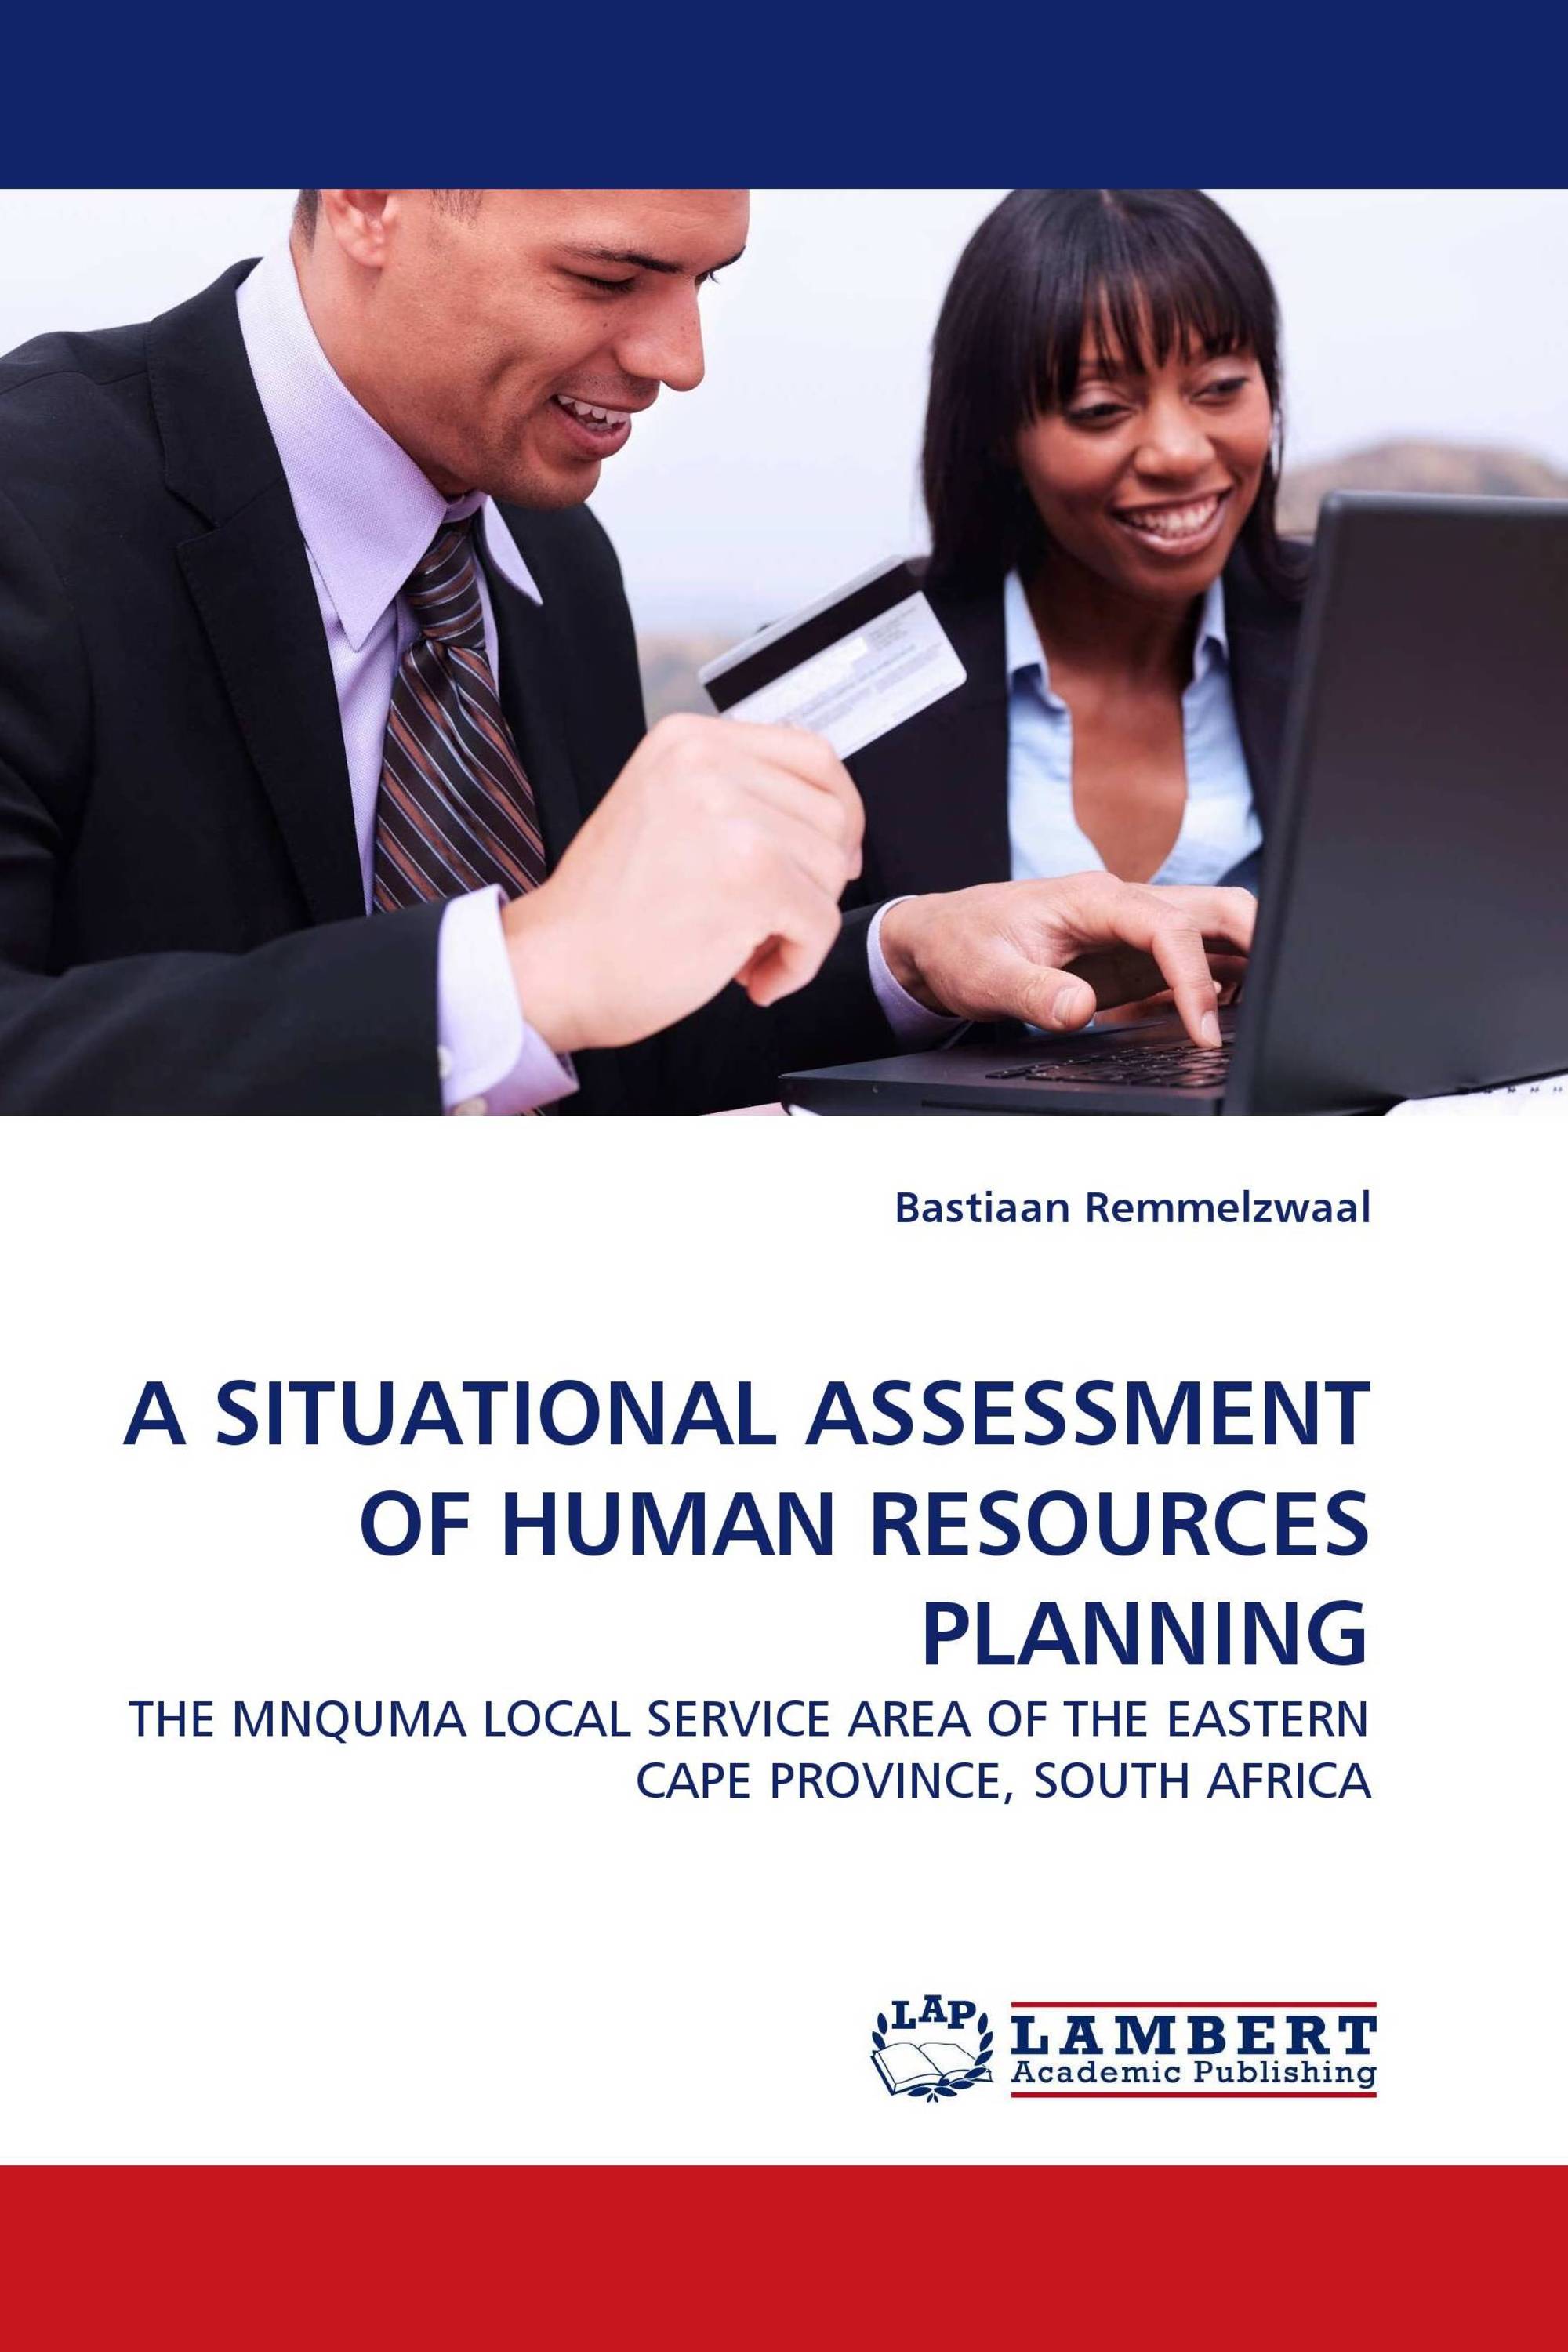 A SITUATIONAL ASSESSMENT OF HUMAN RESOURCES PLANNING